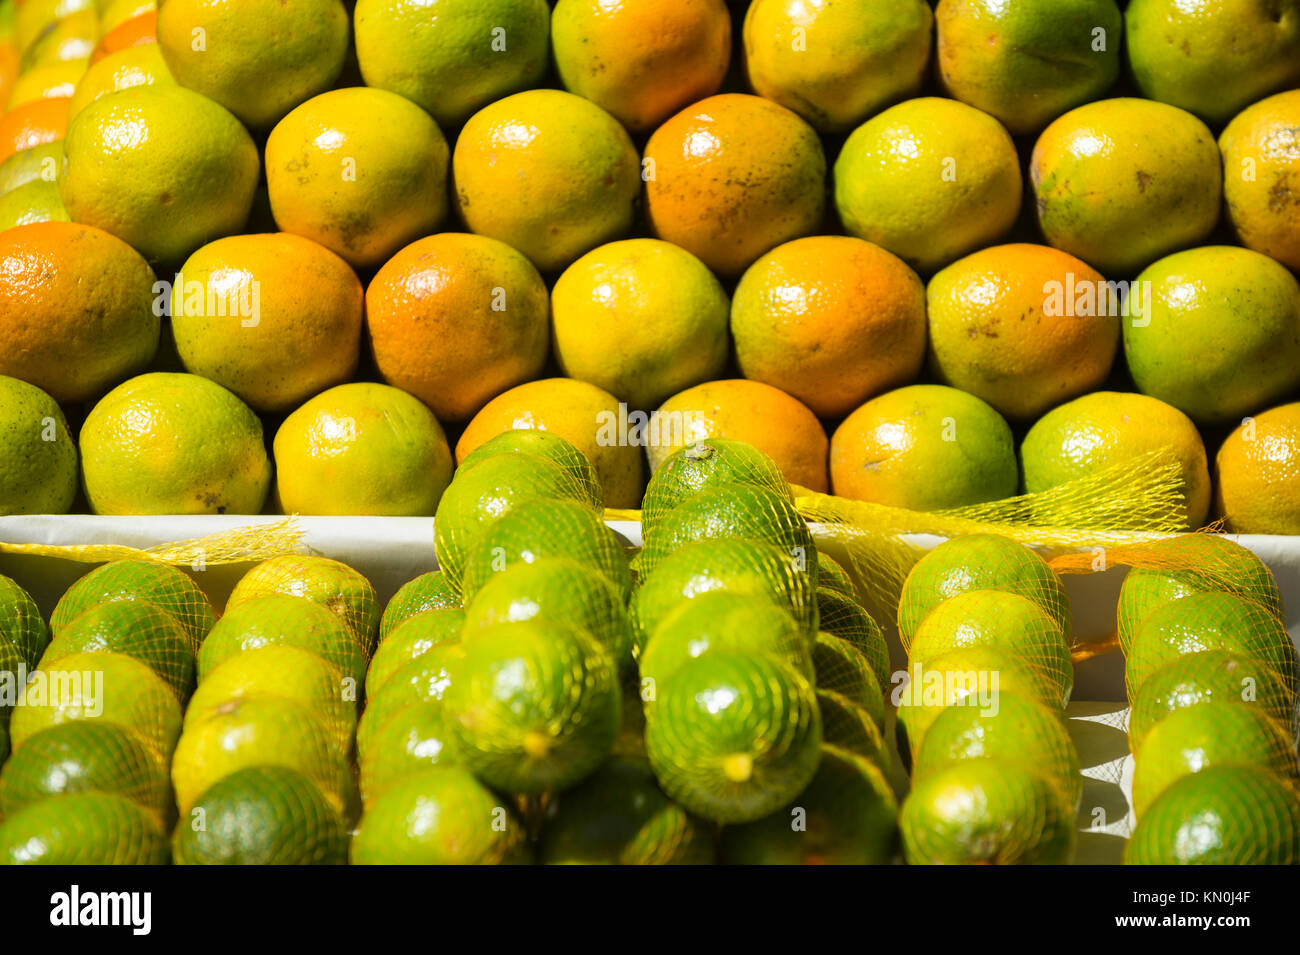 Stack of fresh oranges and limes under natural tropical light at an outdoor farmers market in Rio de Janeiro, Brazil Stock Photo